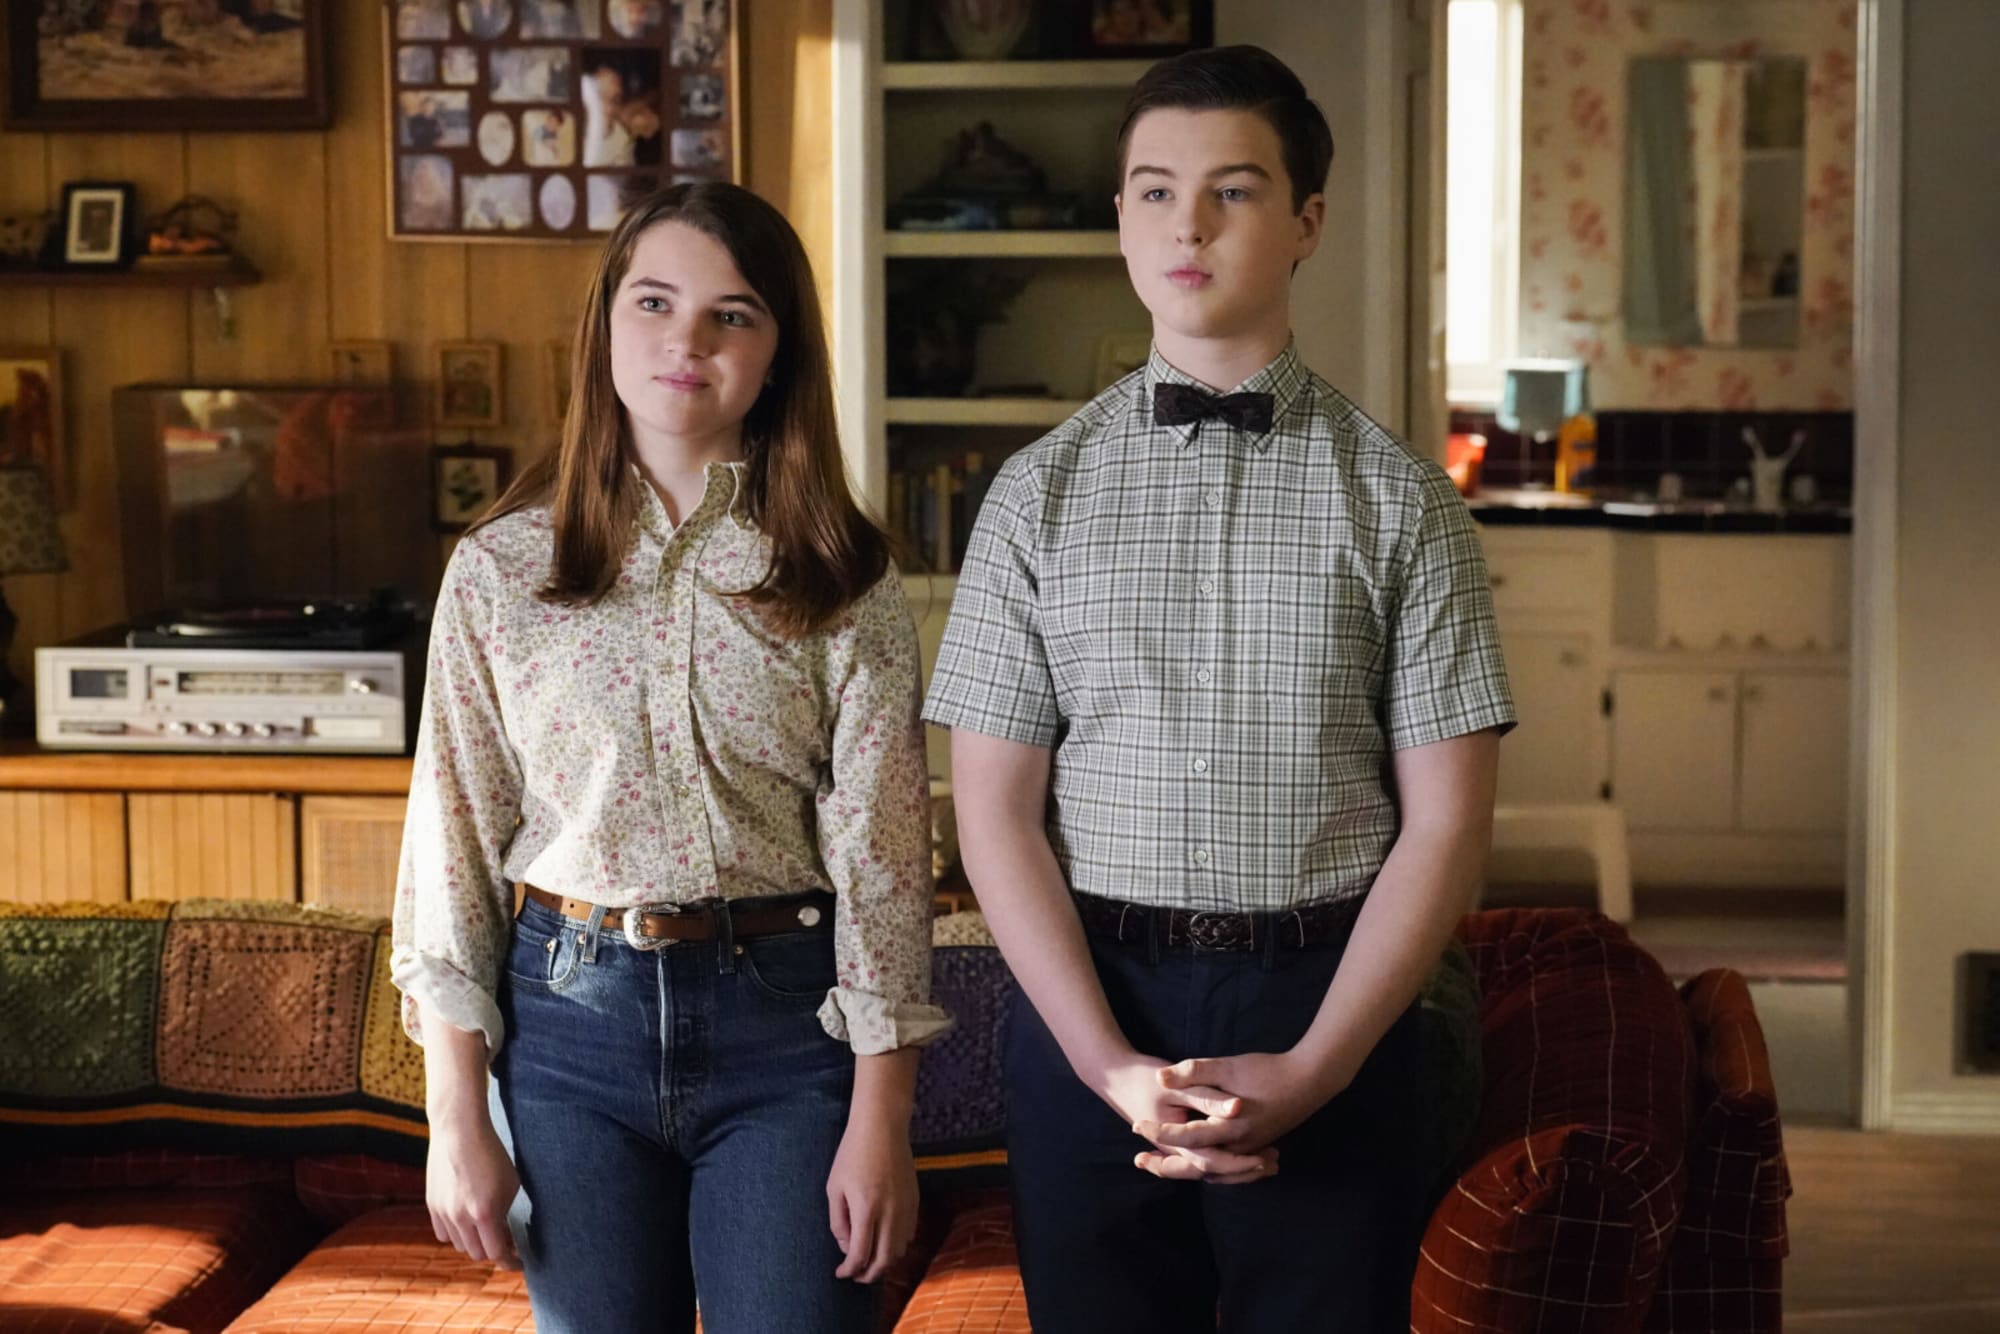 Young Sheldon season 7 release date and everything we know